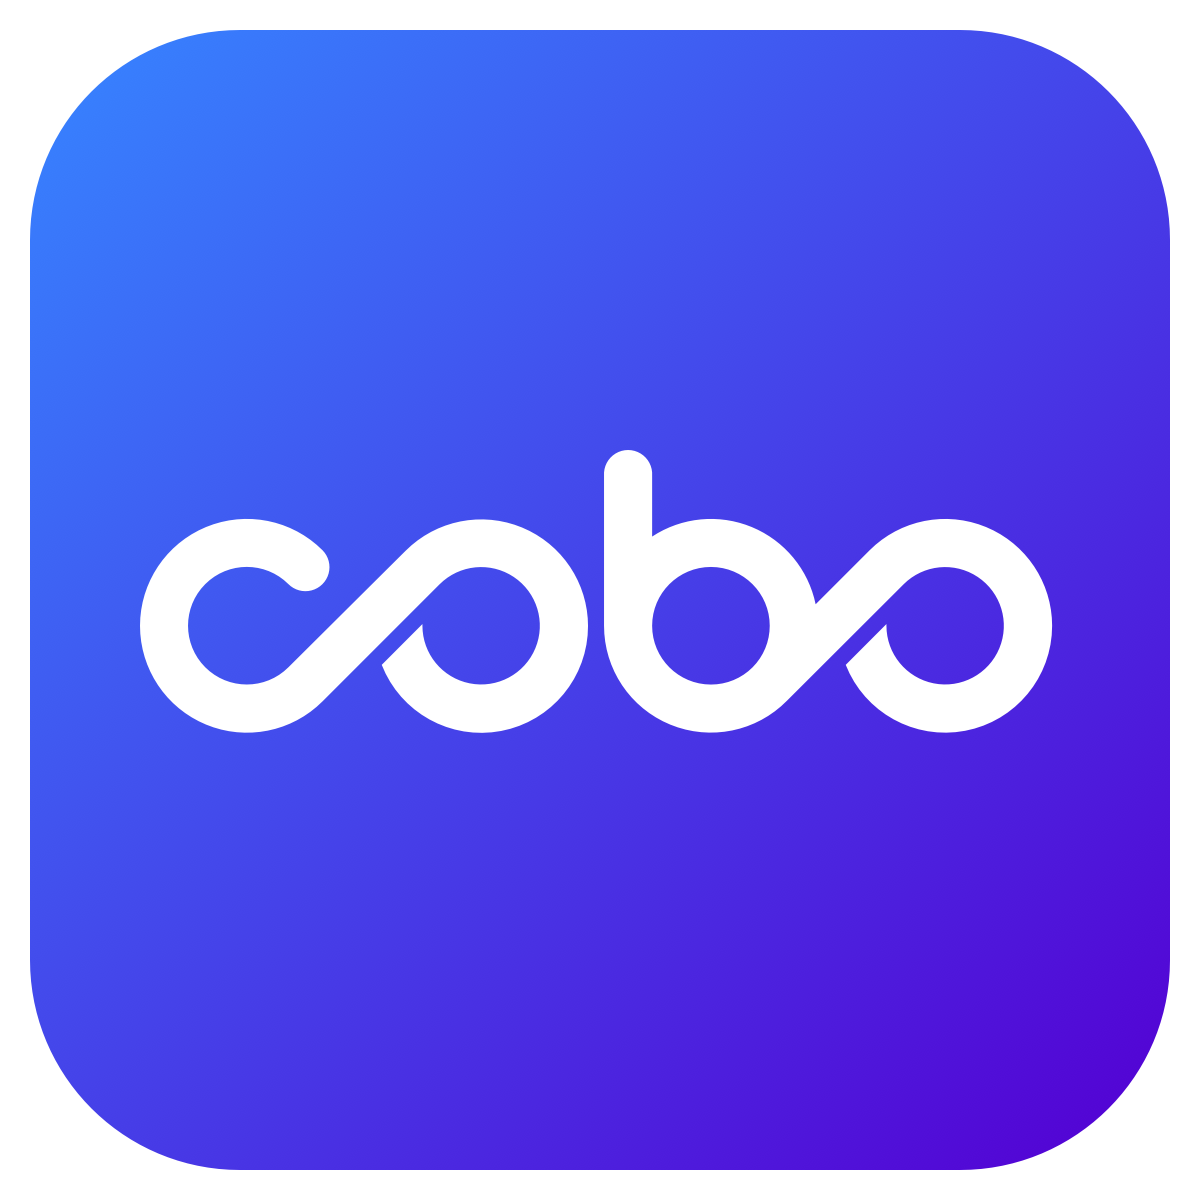 Chinese Cryptocurrency Wallet Cobo Raises $13 Million in Series A Funding